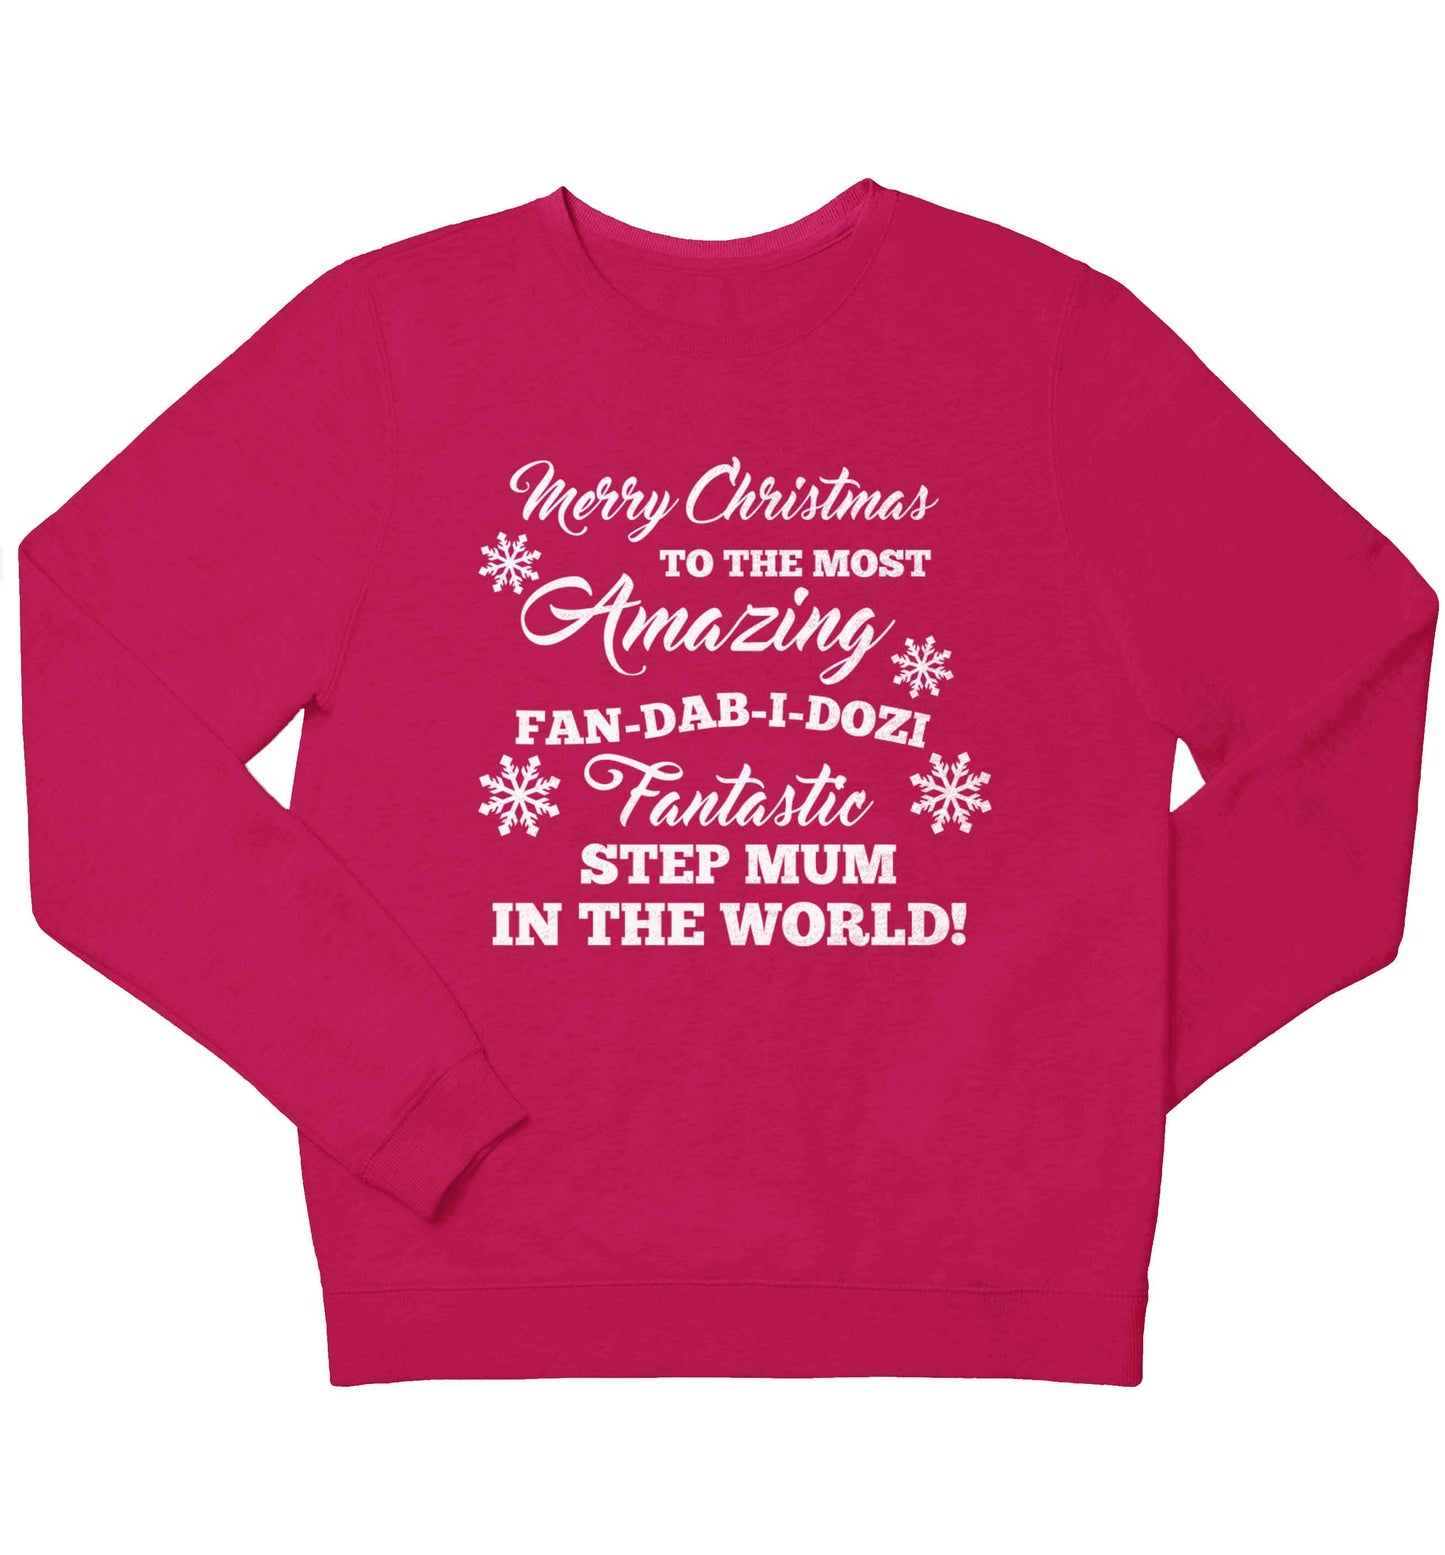 Merry Christmas to the most amazing fan-dab-i-dozi fantasic Step Mum in the world children's pink sweater 12-13 Years